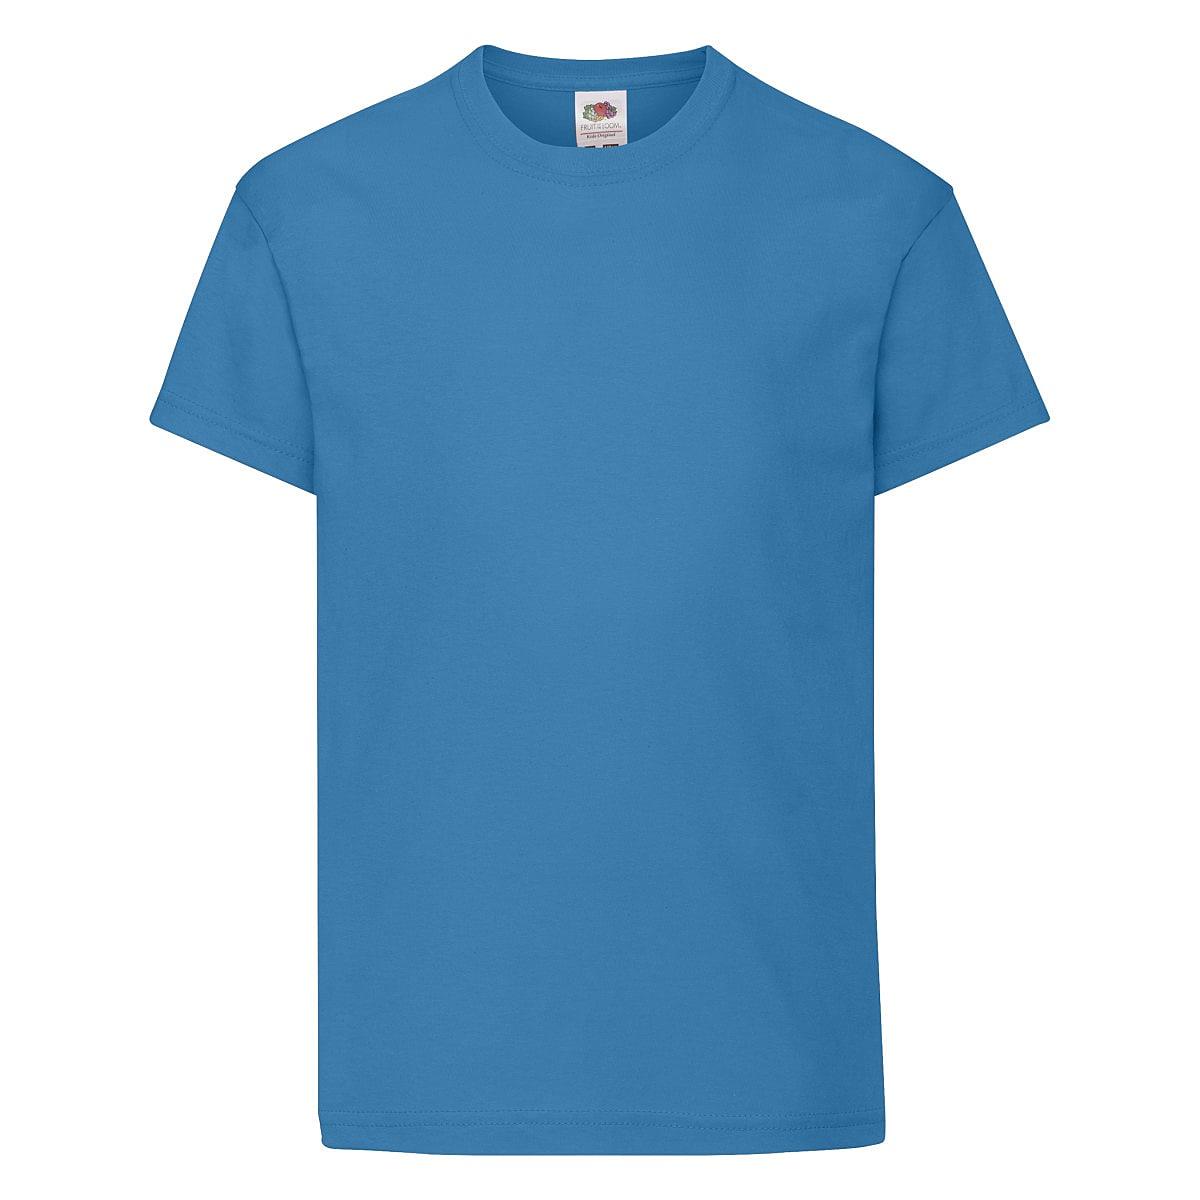 Fruit Of The Loom Kids Original T-Shirt in Azure Blue (Product Code: 61019)